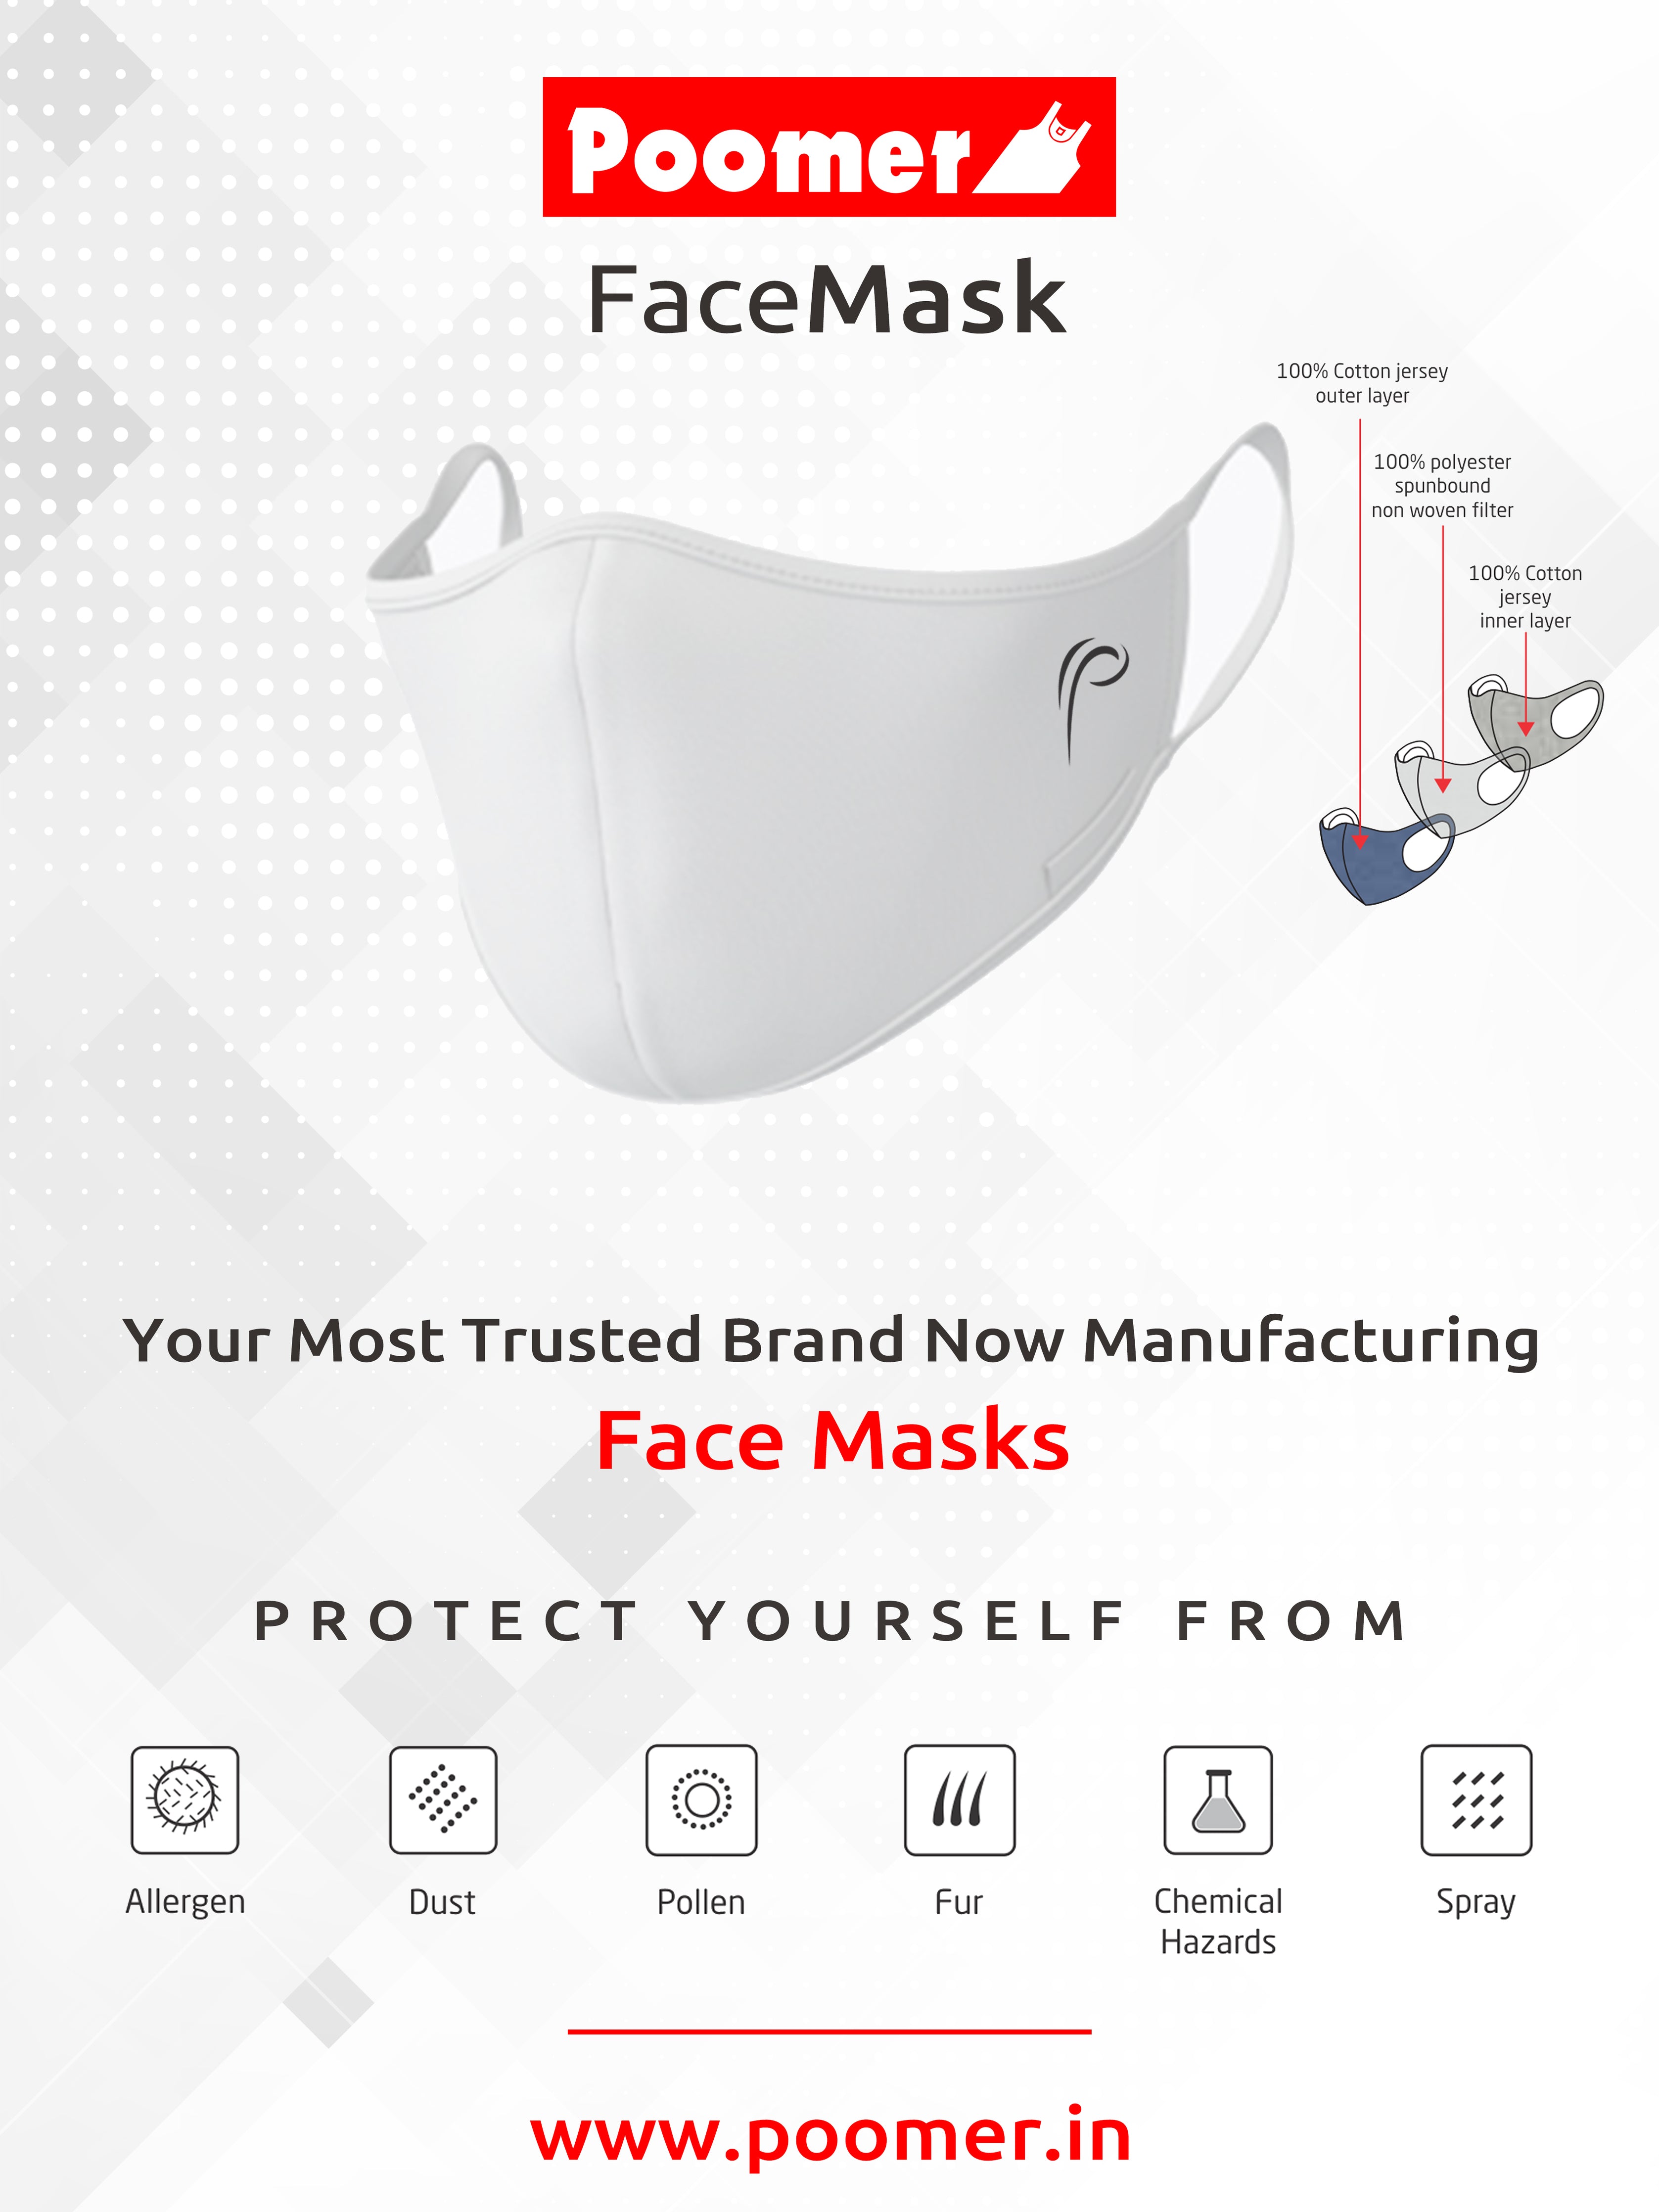 Bright White Poomer Face Mask - 3 layer Anti-Bacterial & Anti-Pollution Face Mask (Pack of 3)